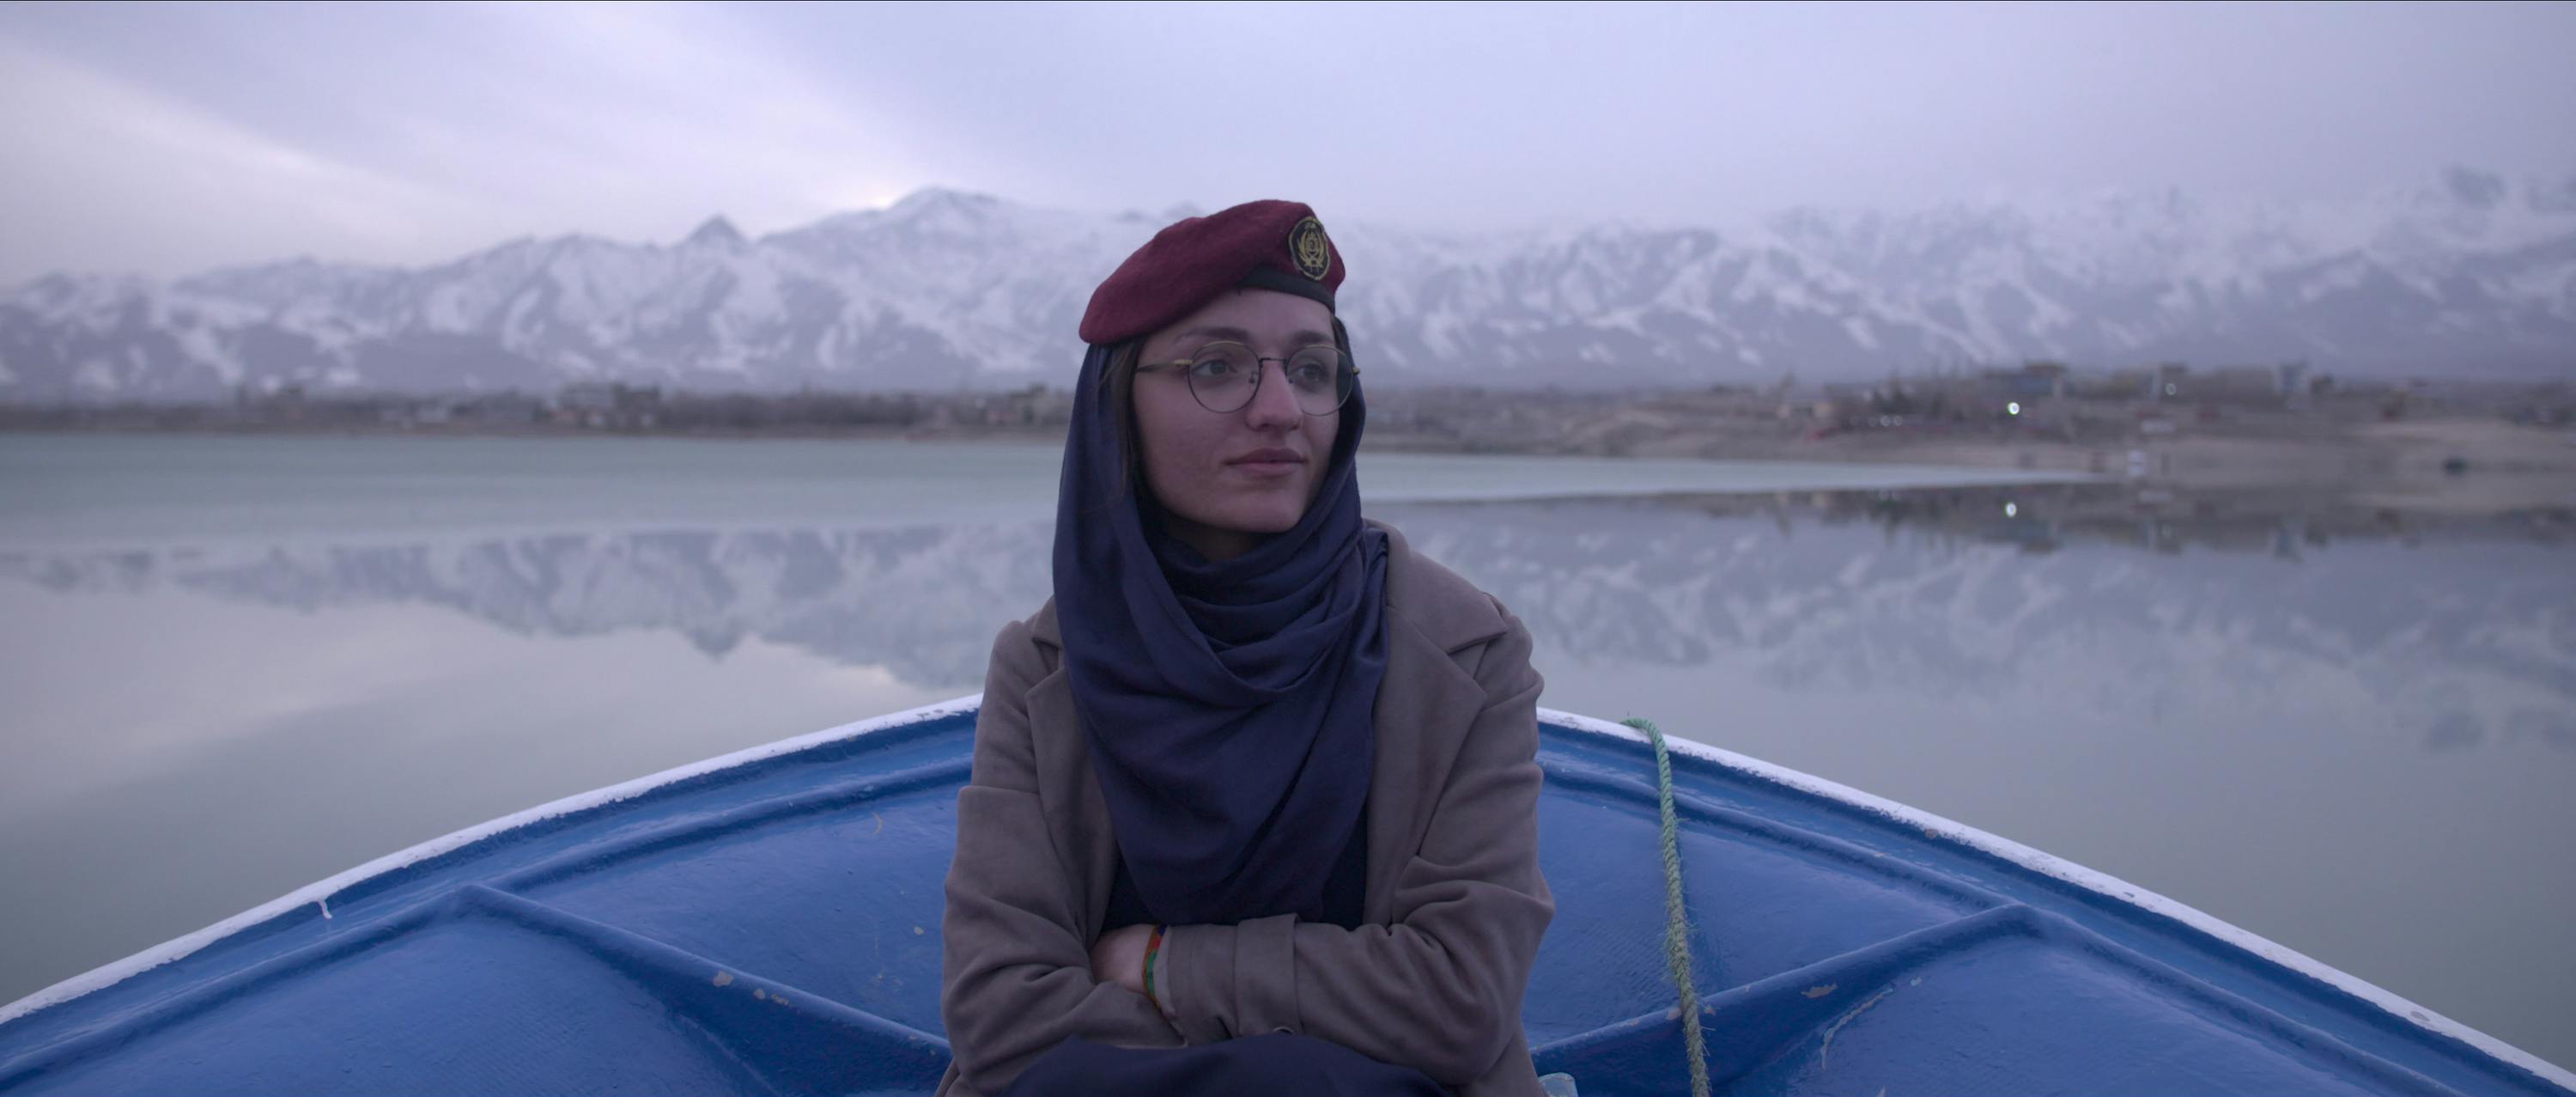 Zarifa Ghafari wears a grey jacket and sits in a blue boat, drifting on a very still body of water, framed by some mountains. 